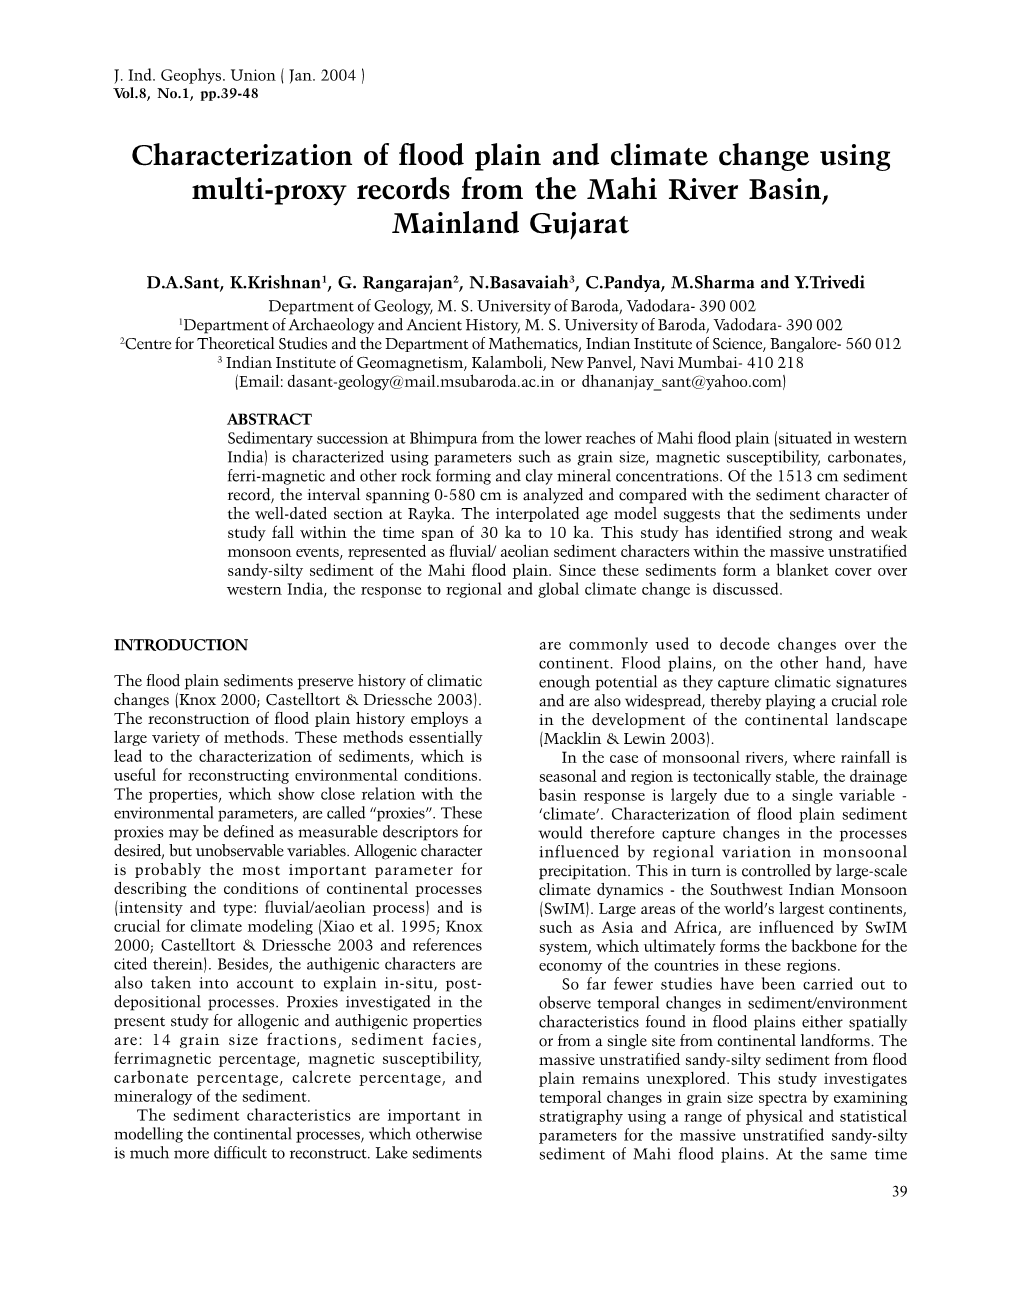 Characterization of Flood Plain and Climate Change Using Multi-Proxy Records from the Mahi River Basin, Mainland Gujarat